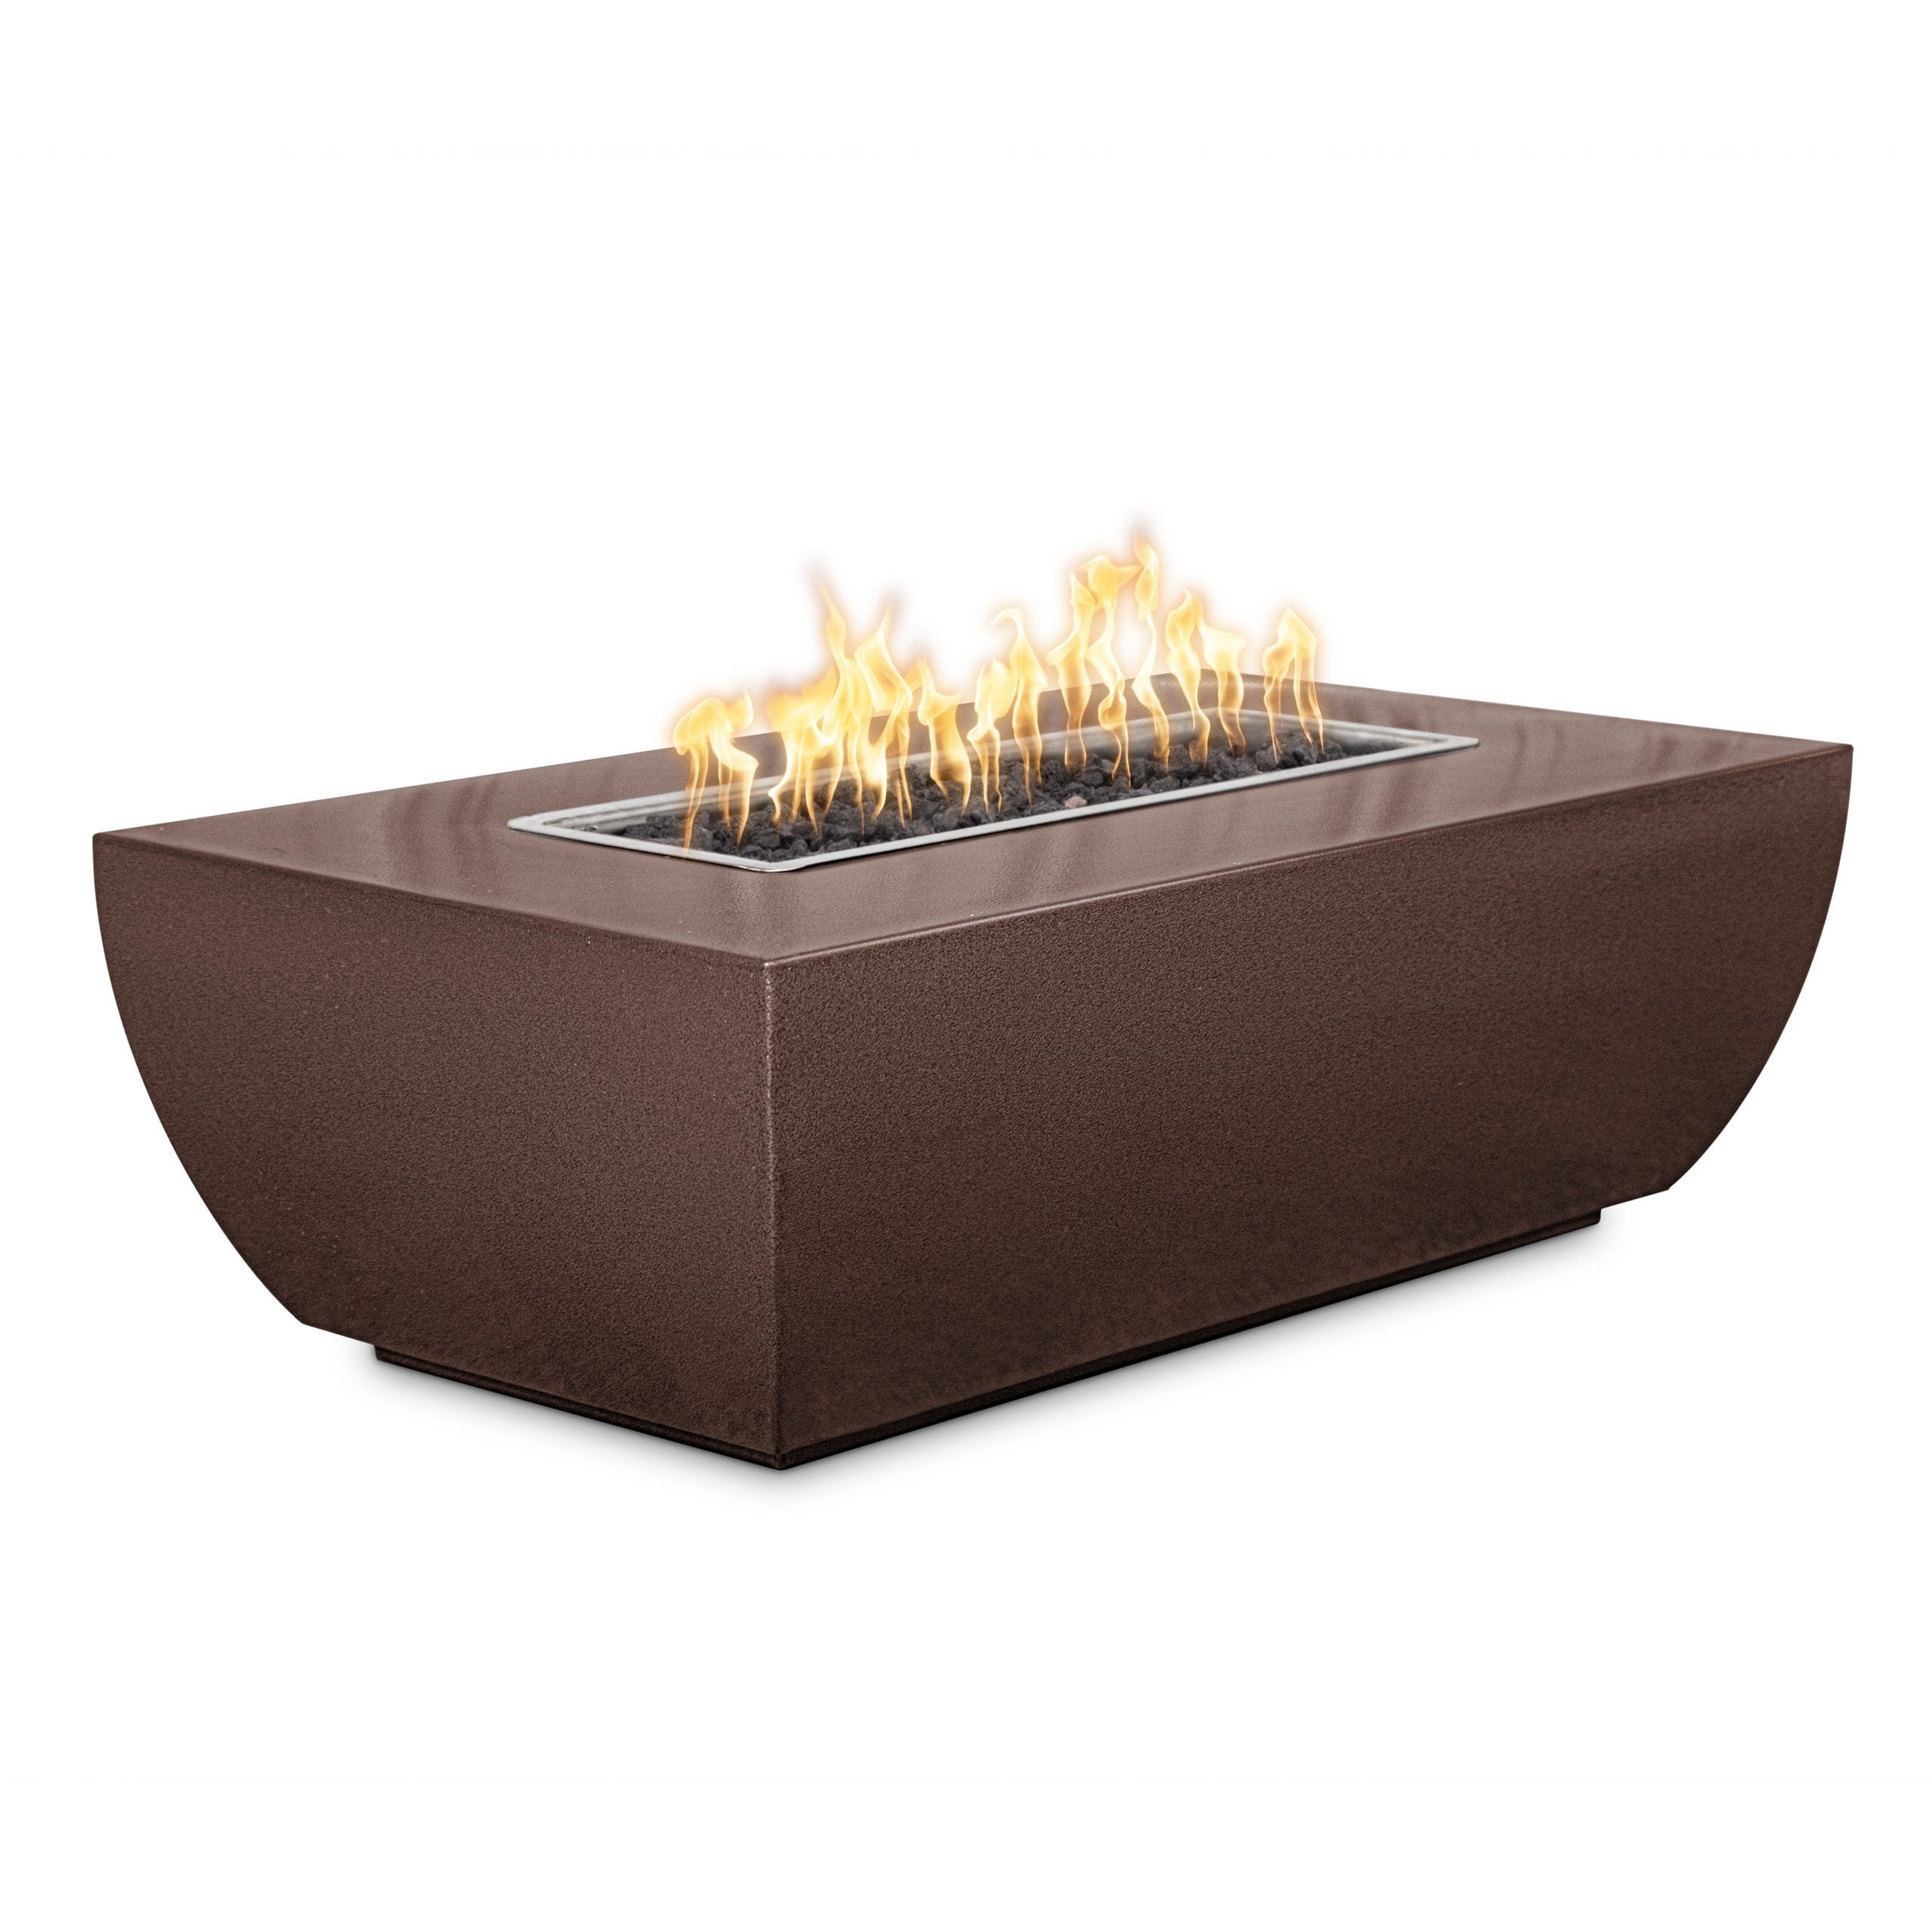 The Outdoor Plus Avalon Tall Fire Pit 48" Rectangular Powder Coated Metal Match Lit with Flame Sense OPT-AVLPC4815FSML